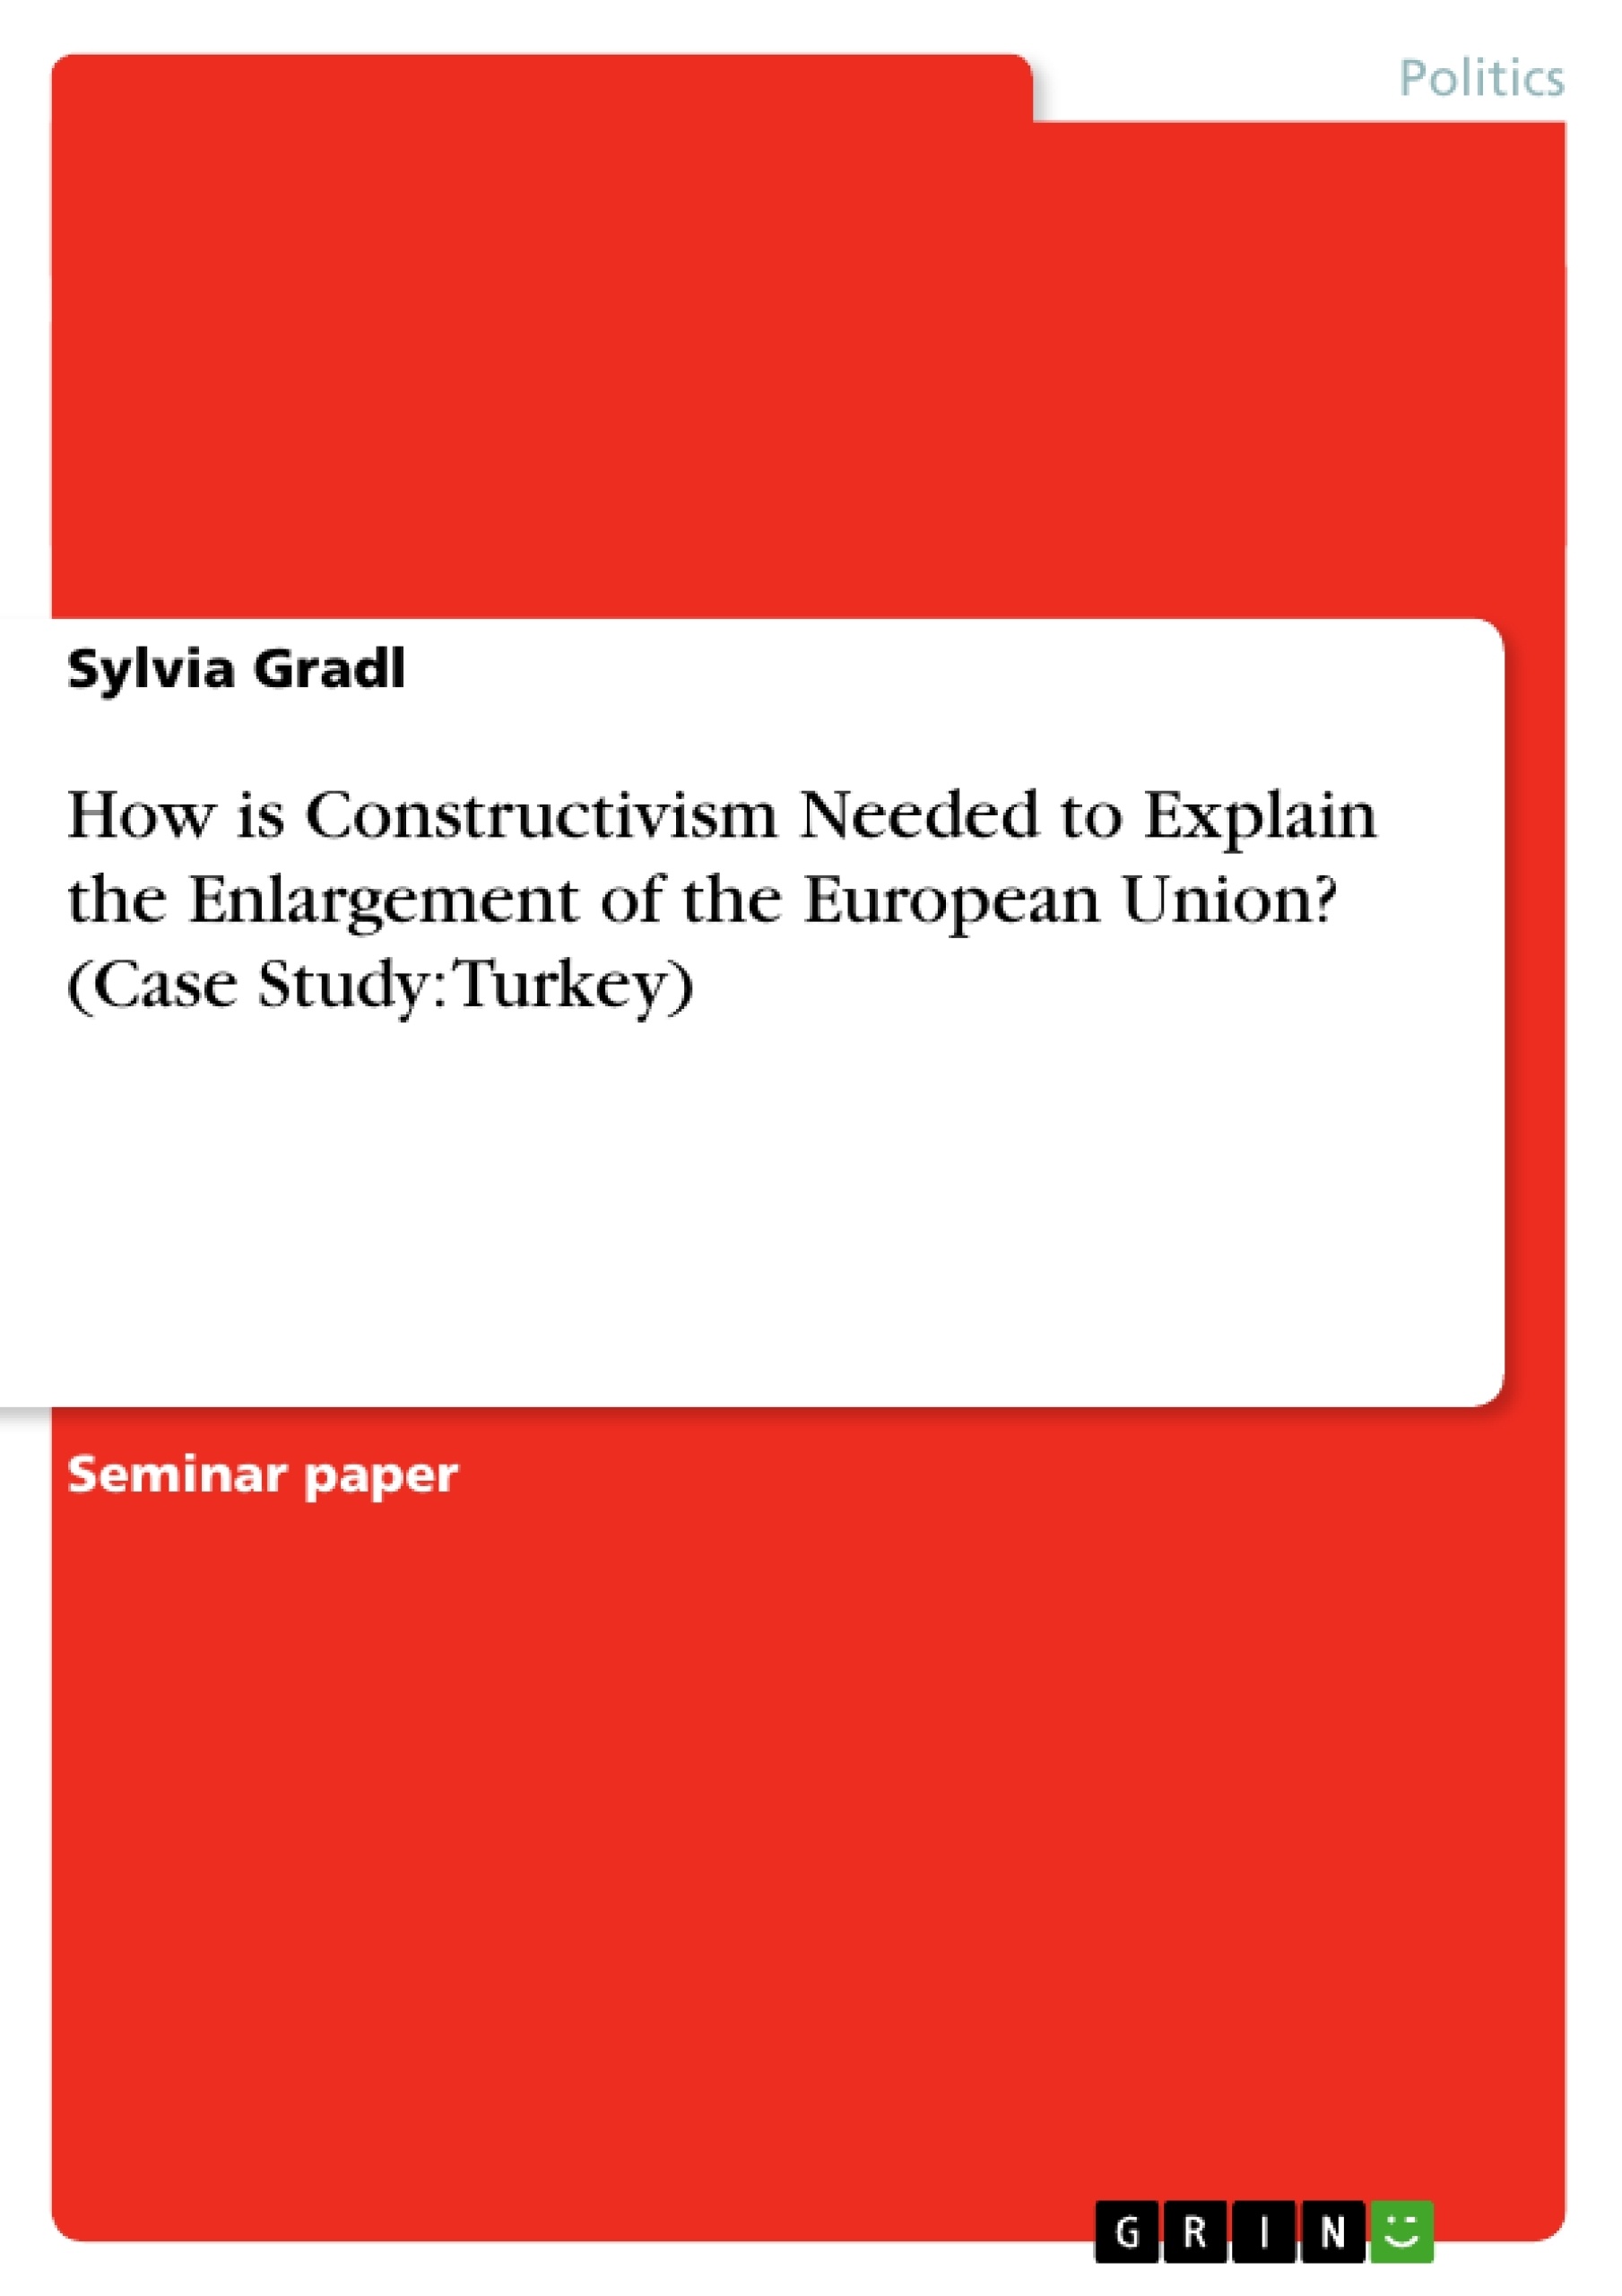 Title: How is Constructivism Needed to Explain the Enlargement of the European Union? (Case Study: Turkey)